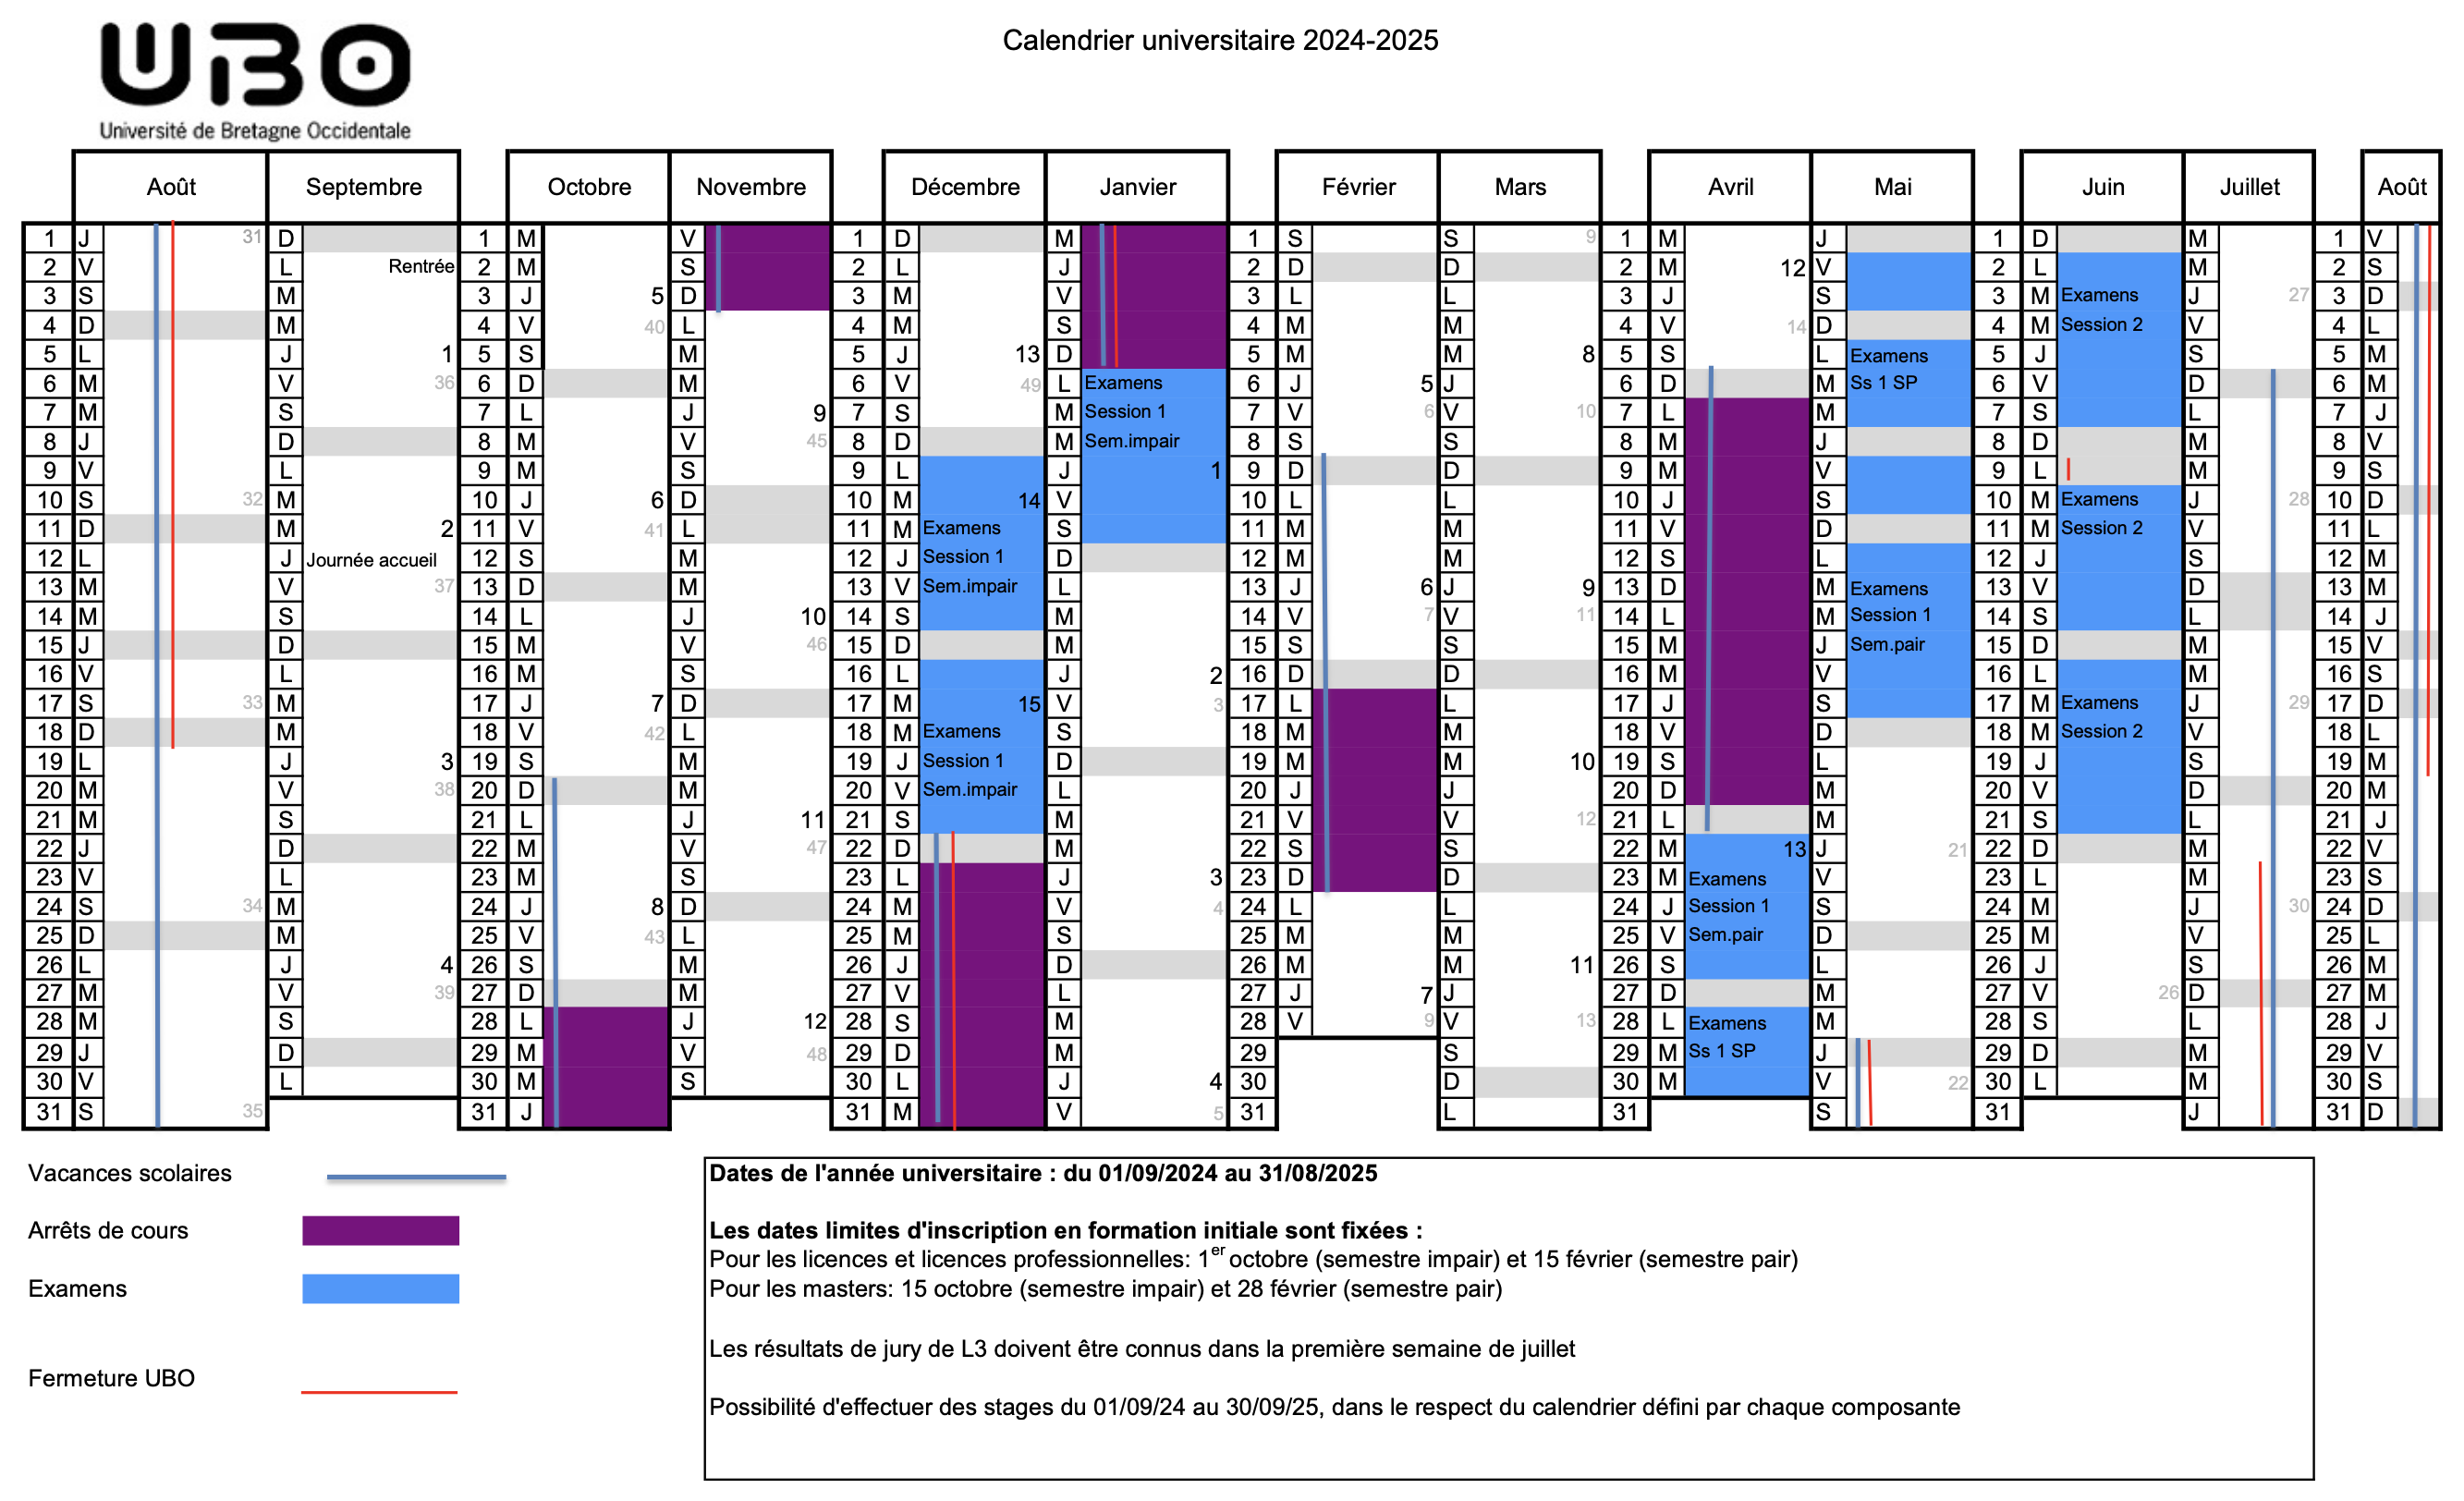 calendrier-universitaire-24-25.png